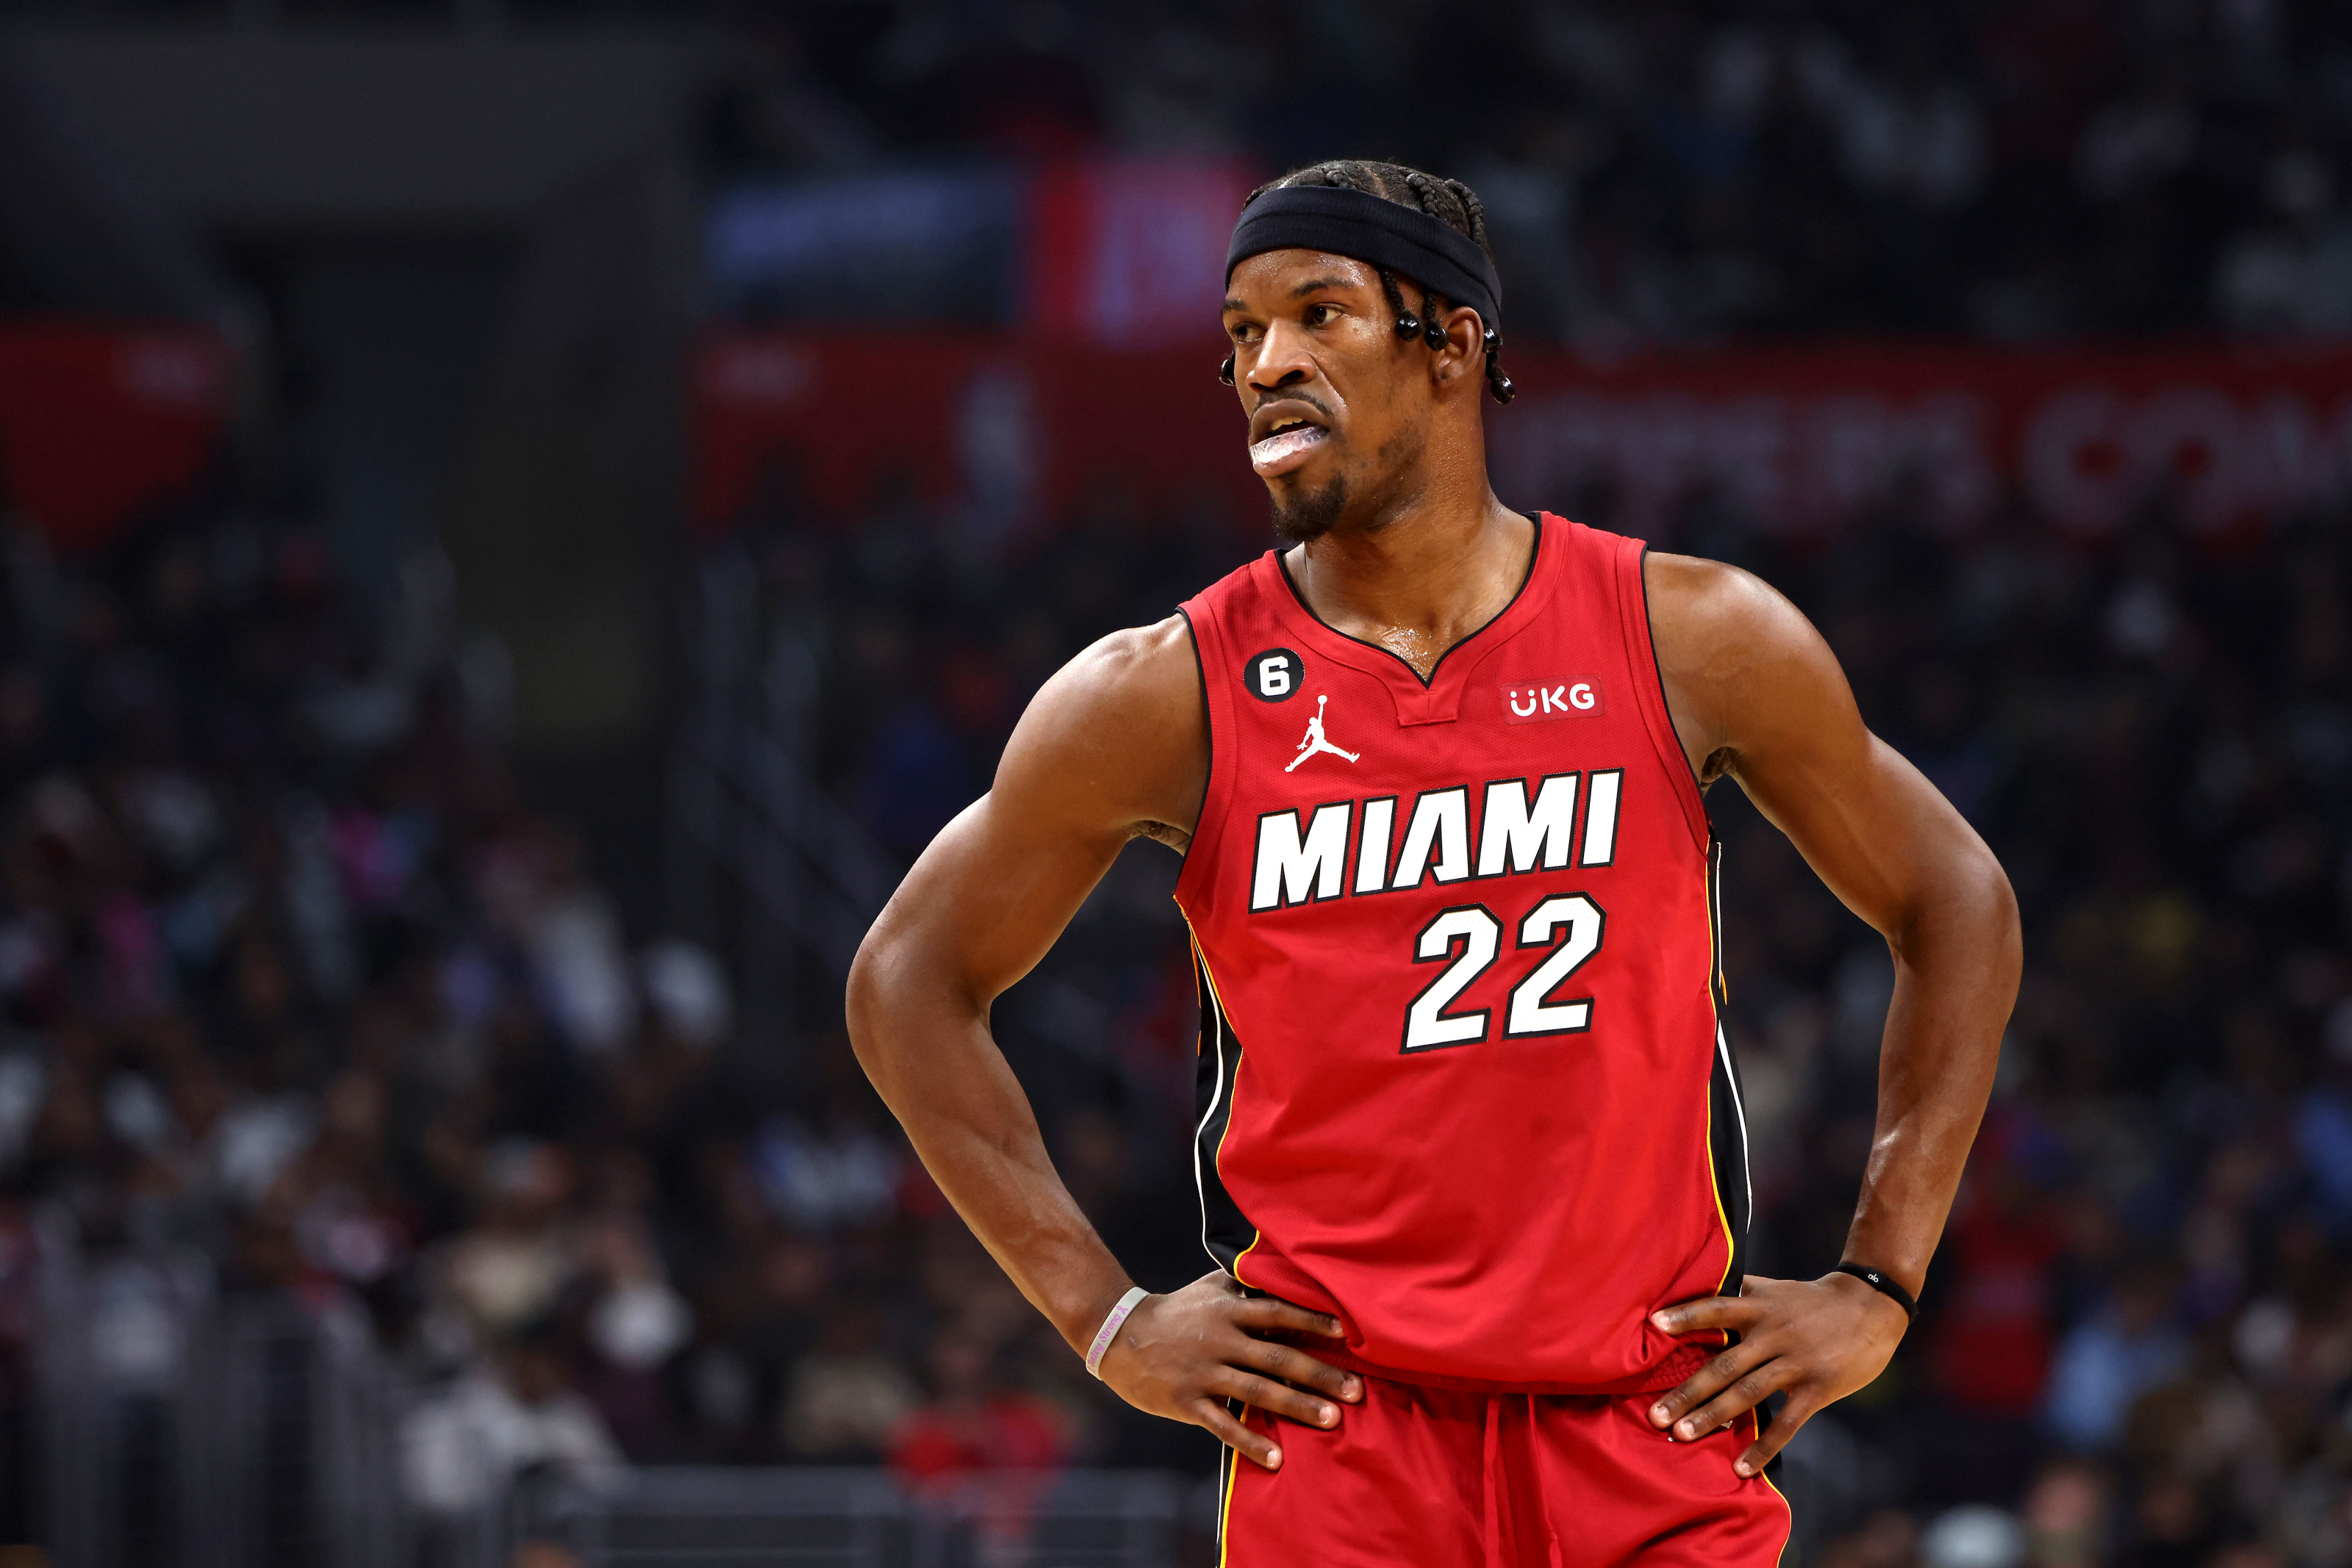 Miami Heat: Are they pretenders or contenders heading into 2020-21?